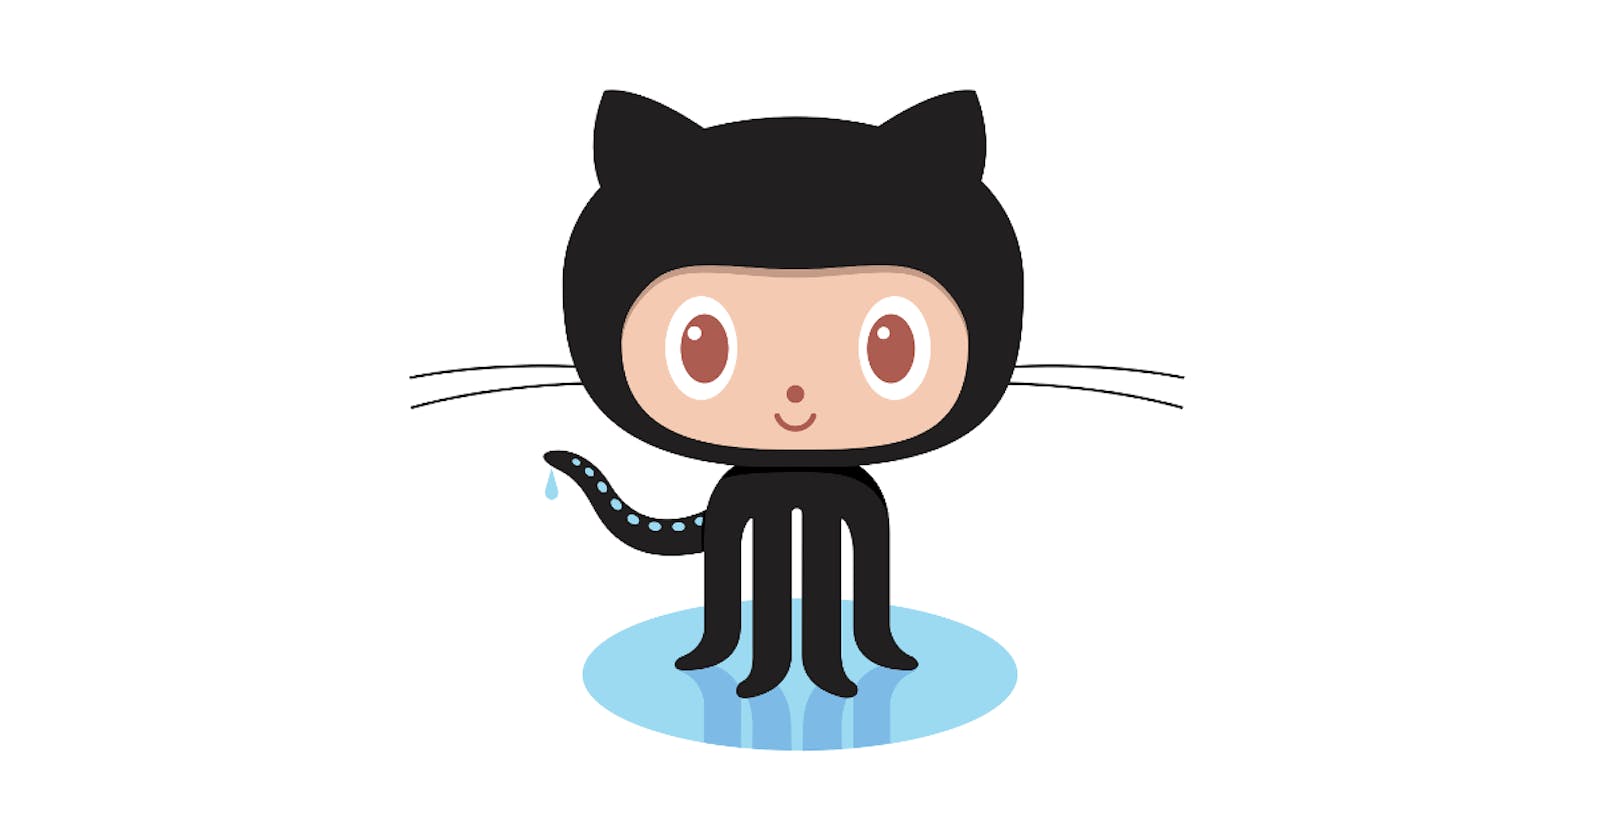 #READme For Github Projects